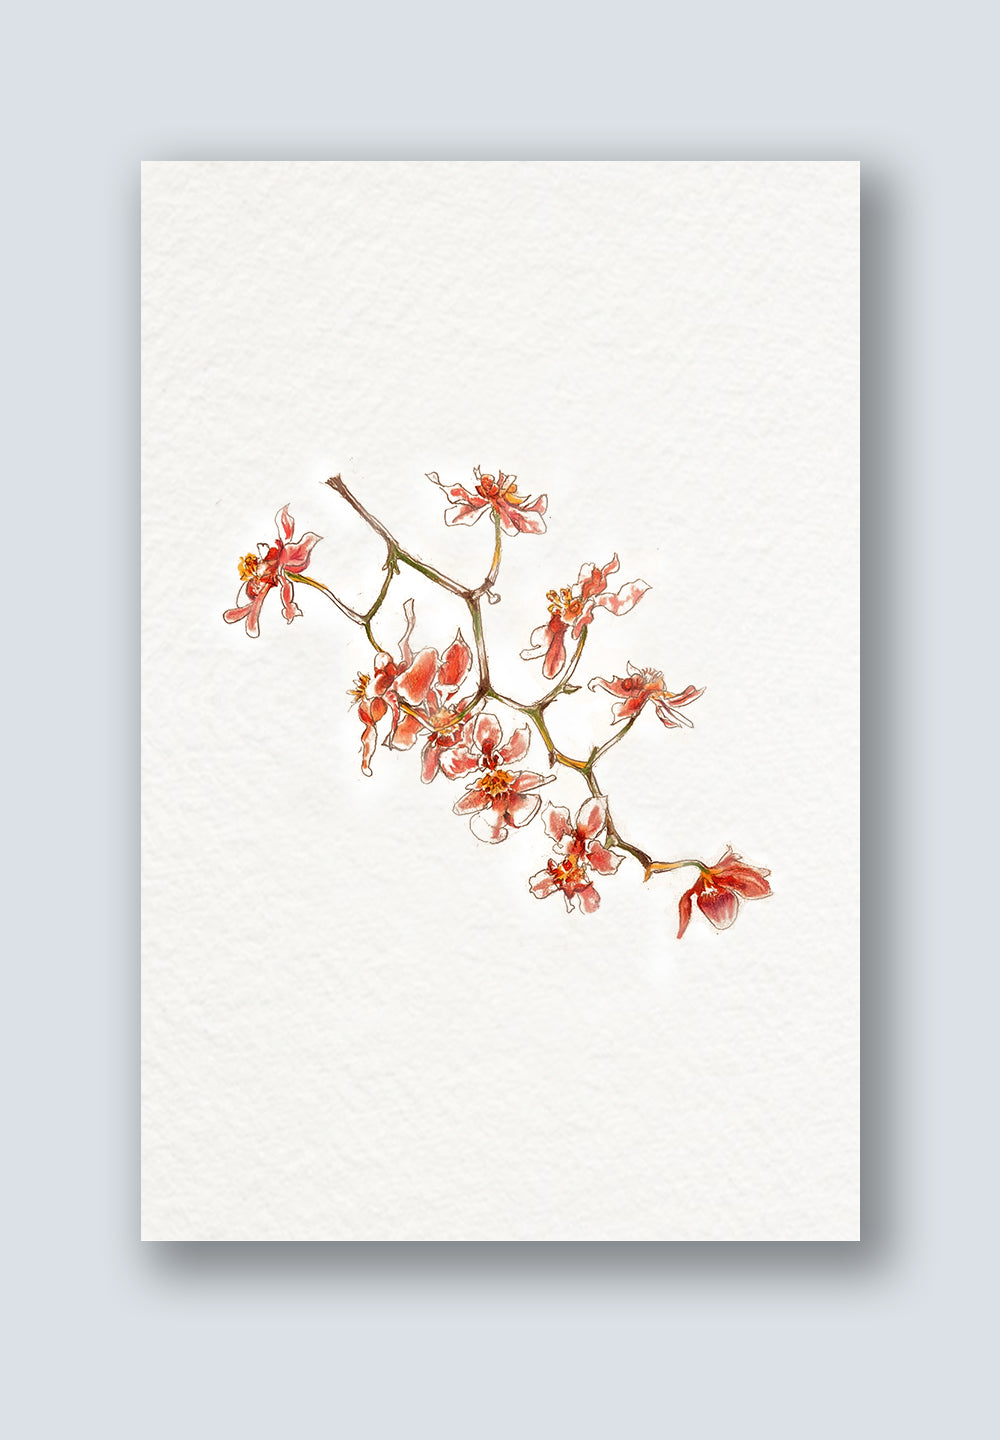 Orchid Greeting Cards - Graduation Greeting Card